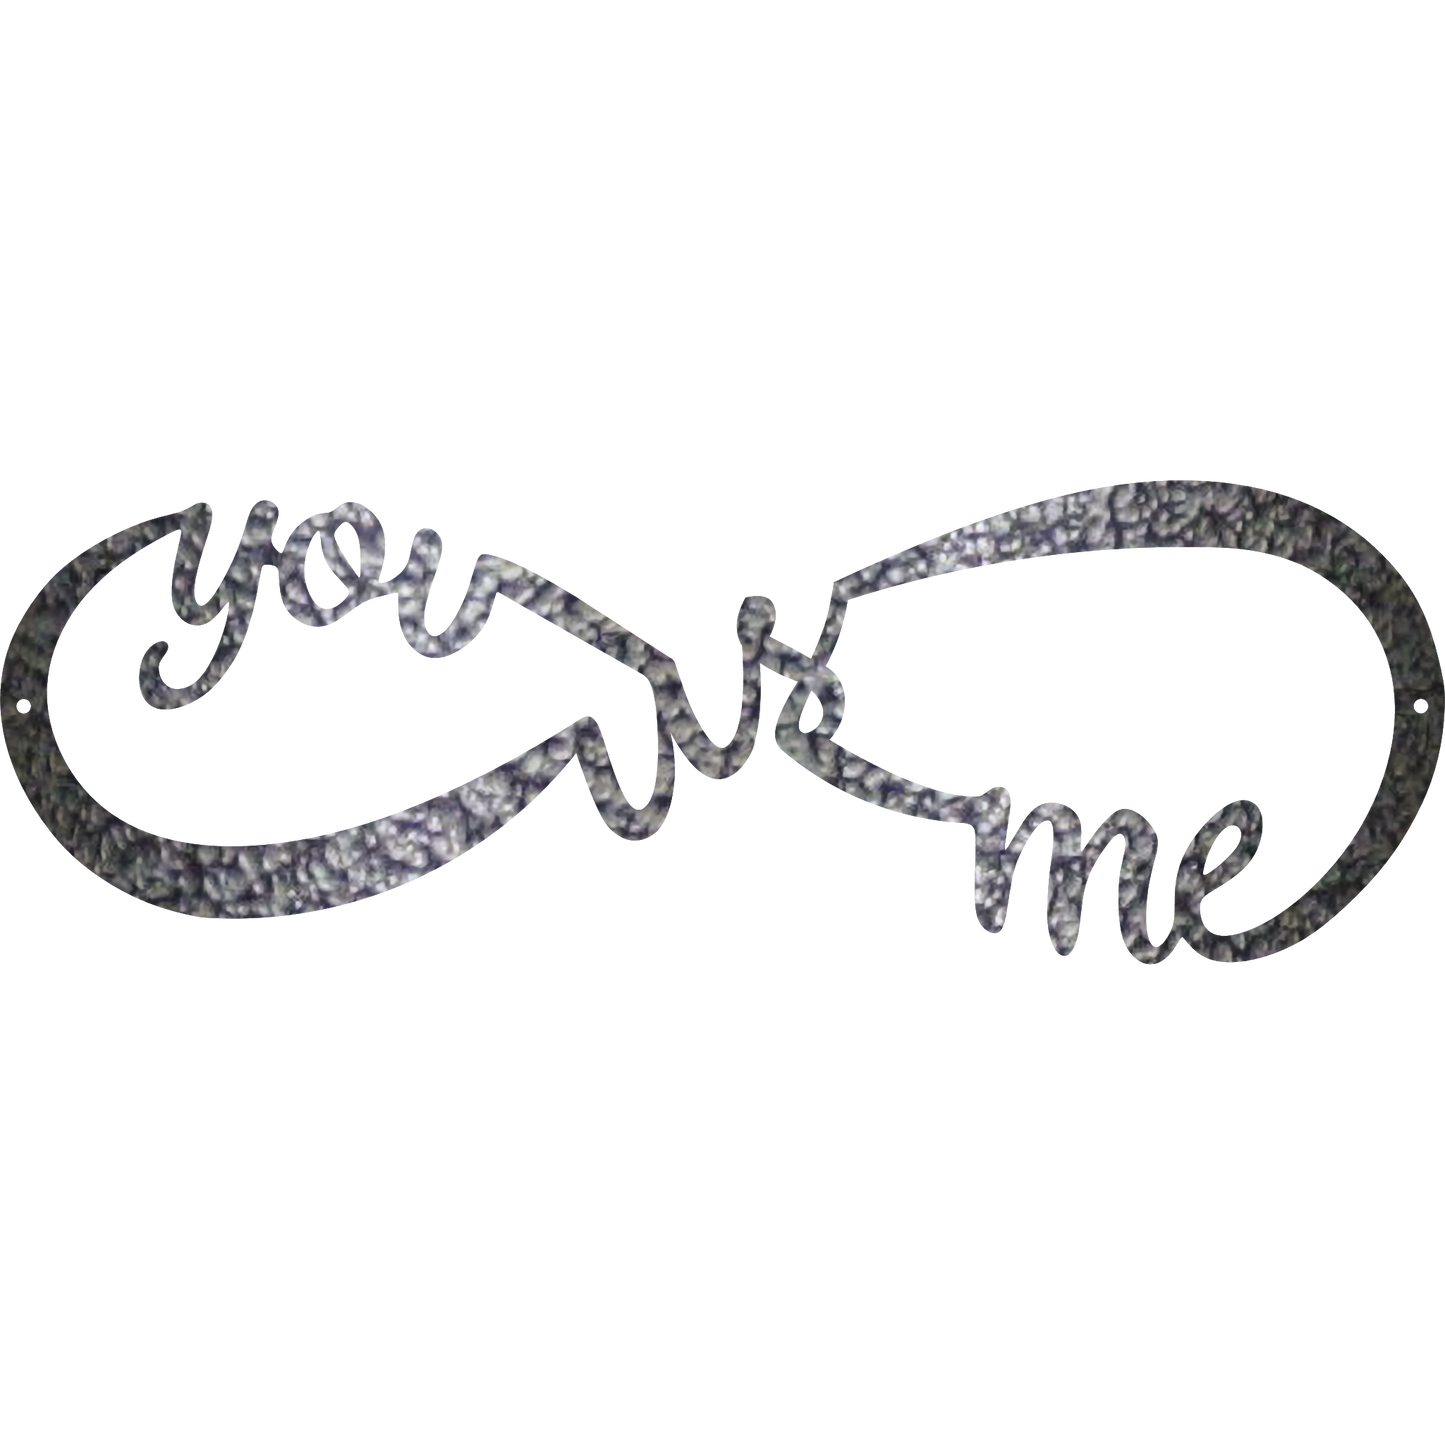 You Me and US Infinity - Metal Wall Art Hammer Silver - Badger Steel USA